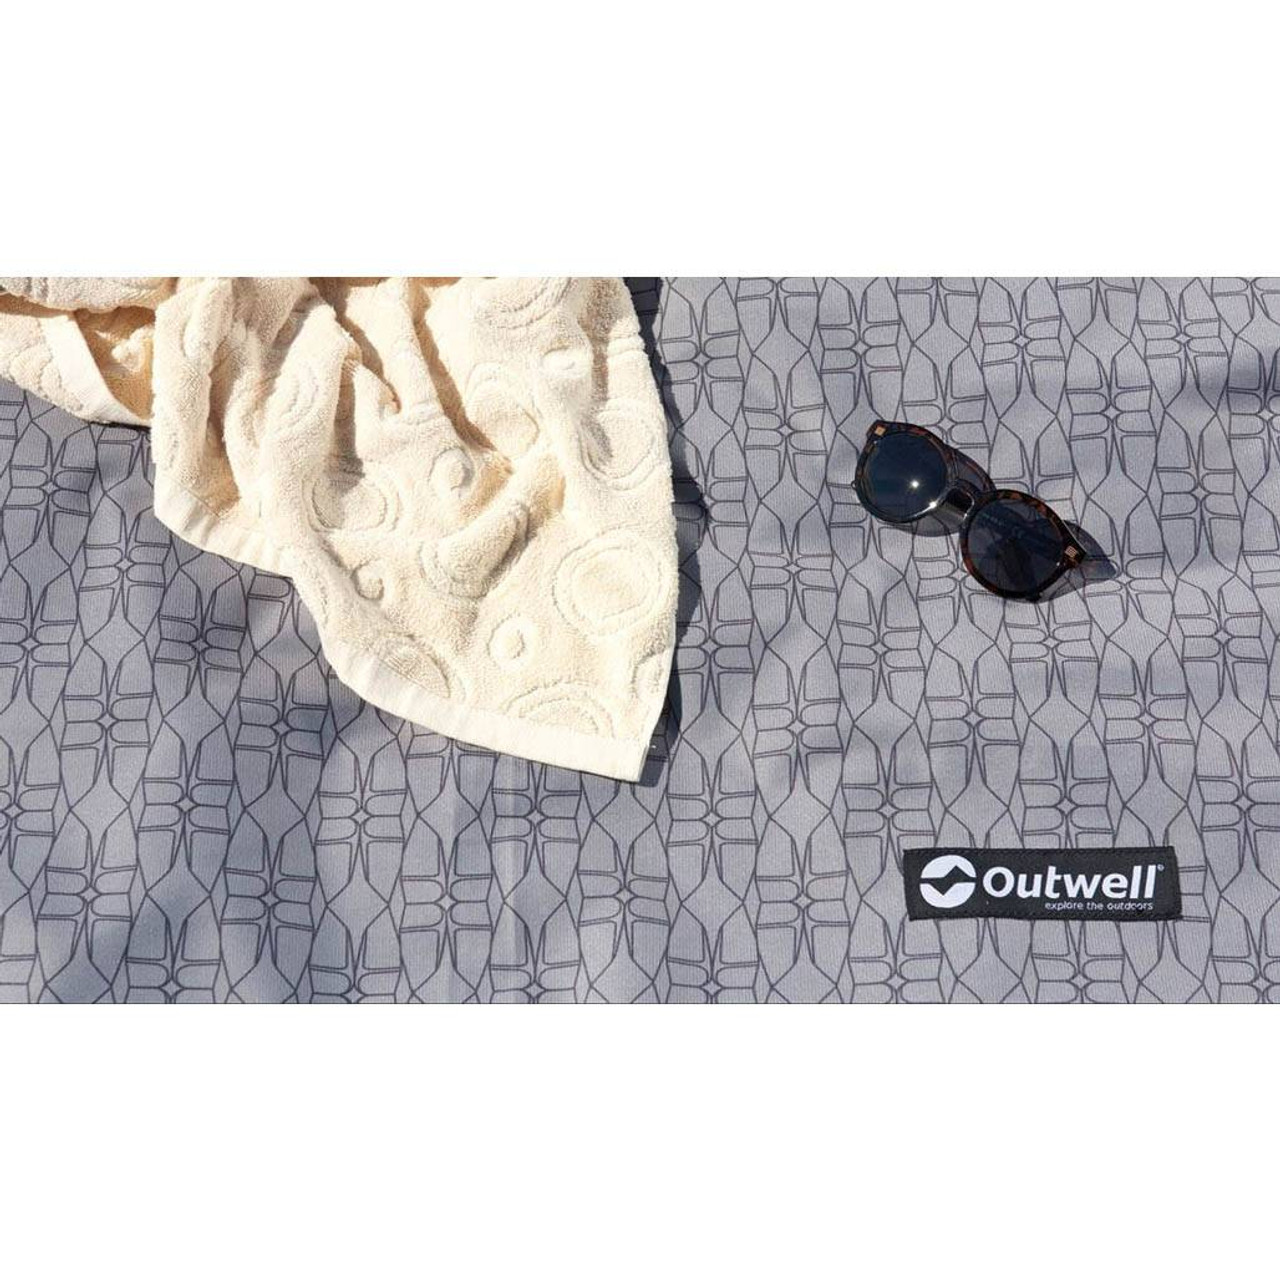 Image of Outwell Flat Woven Carpet for Springwood 4SG Tent